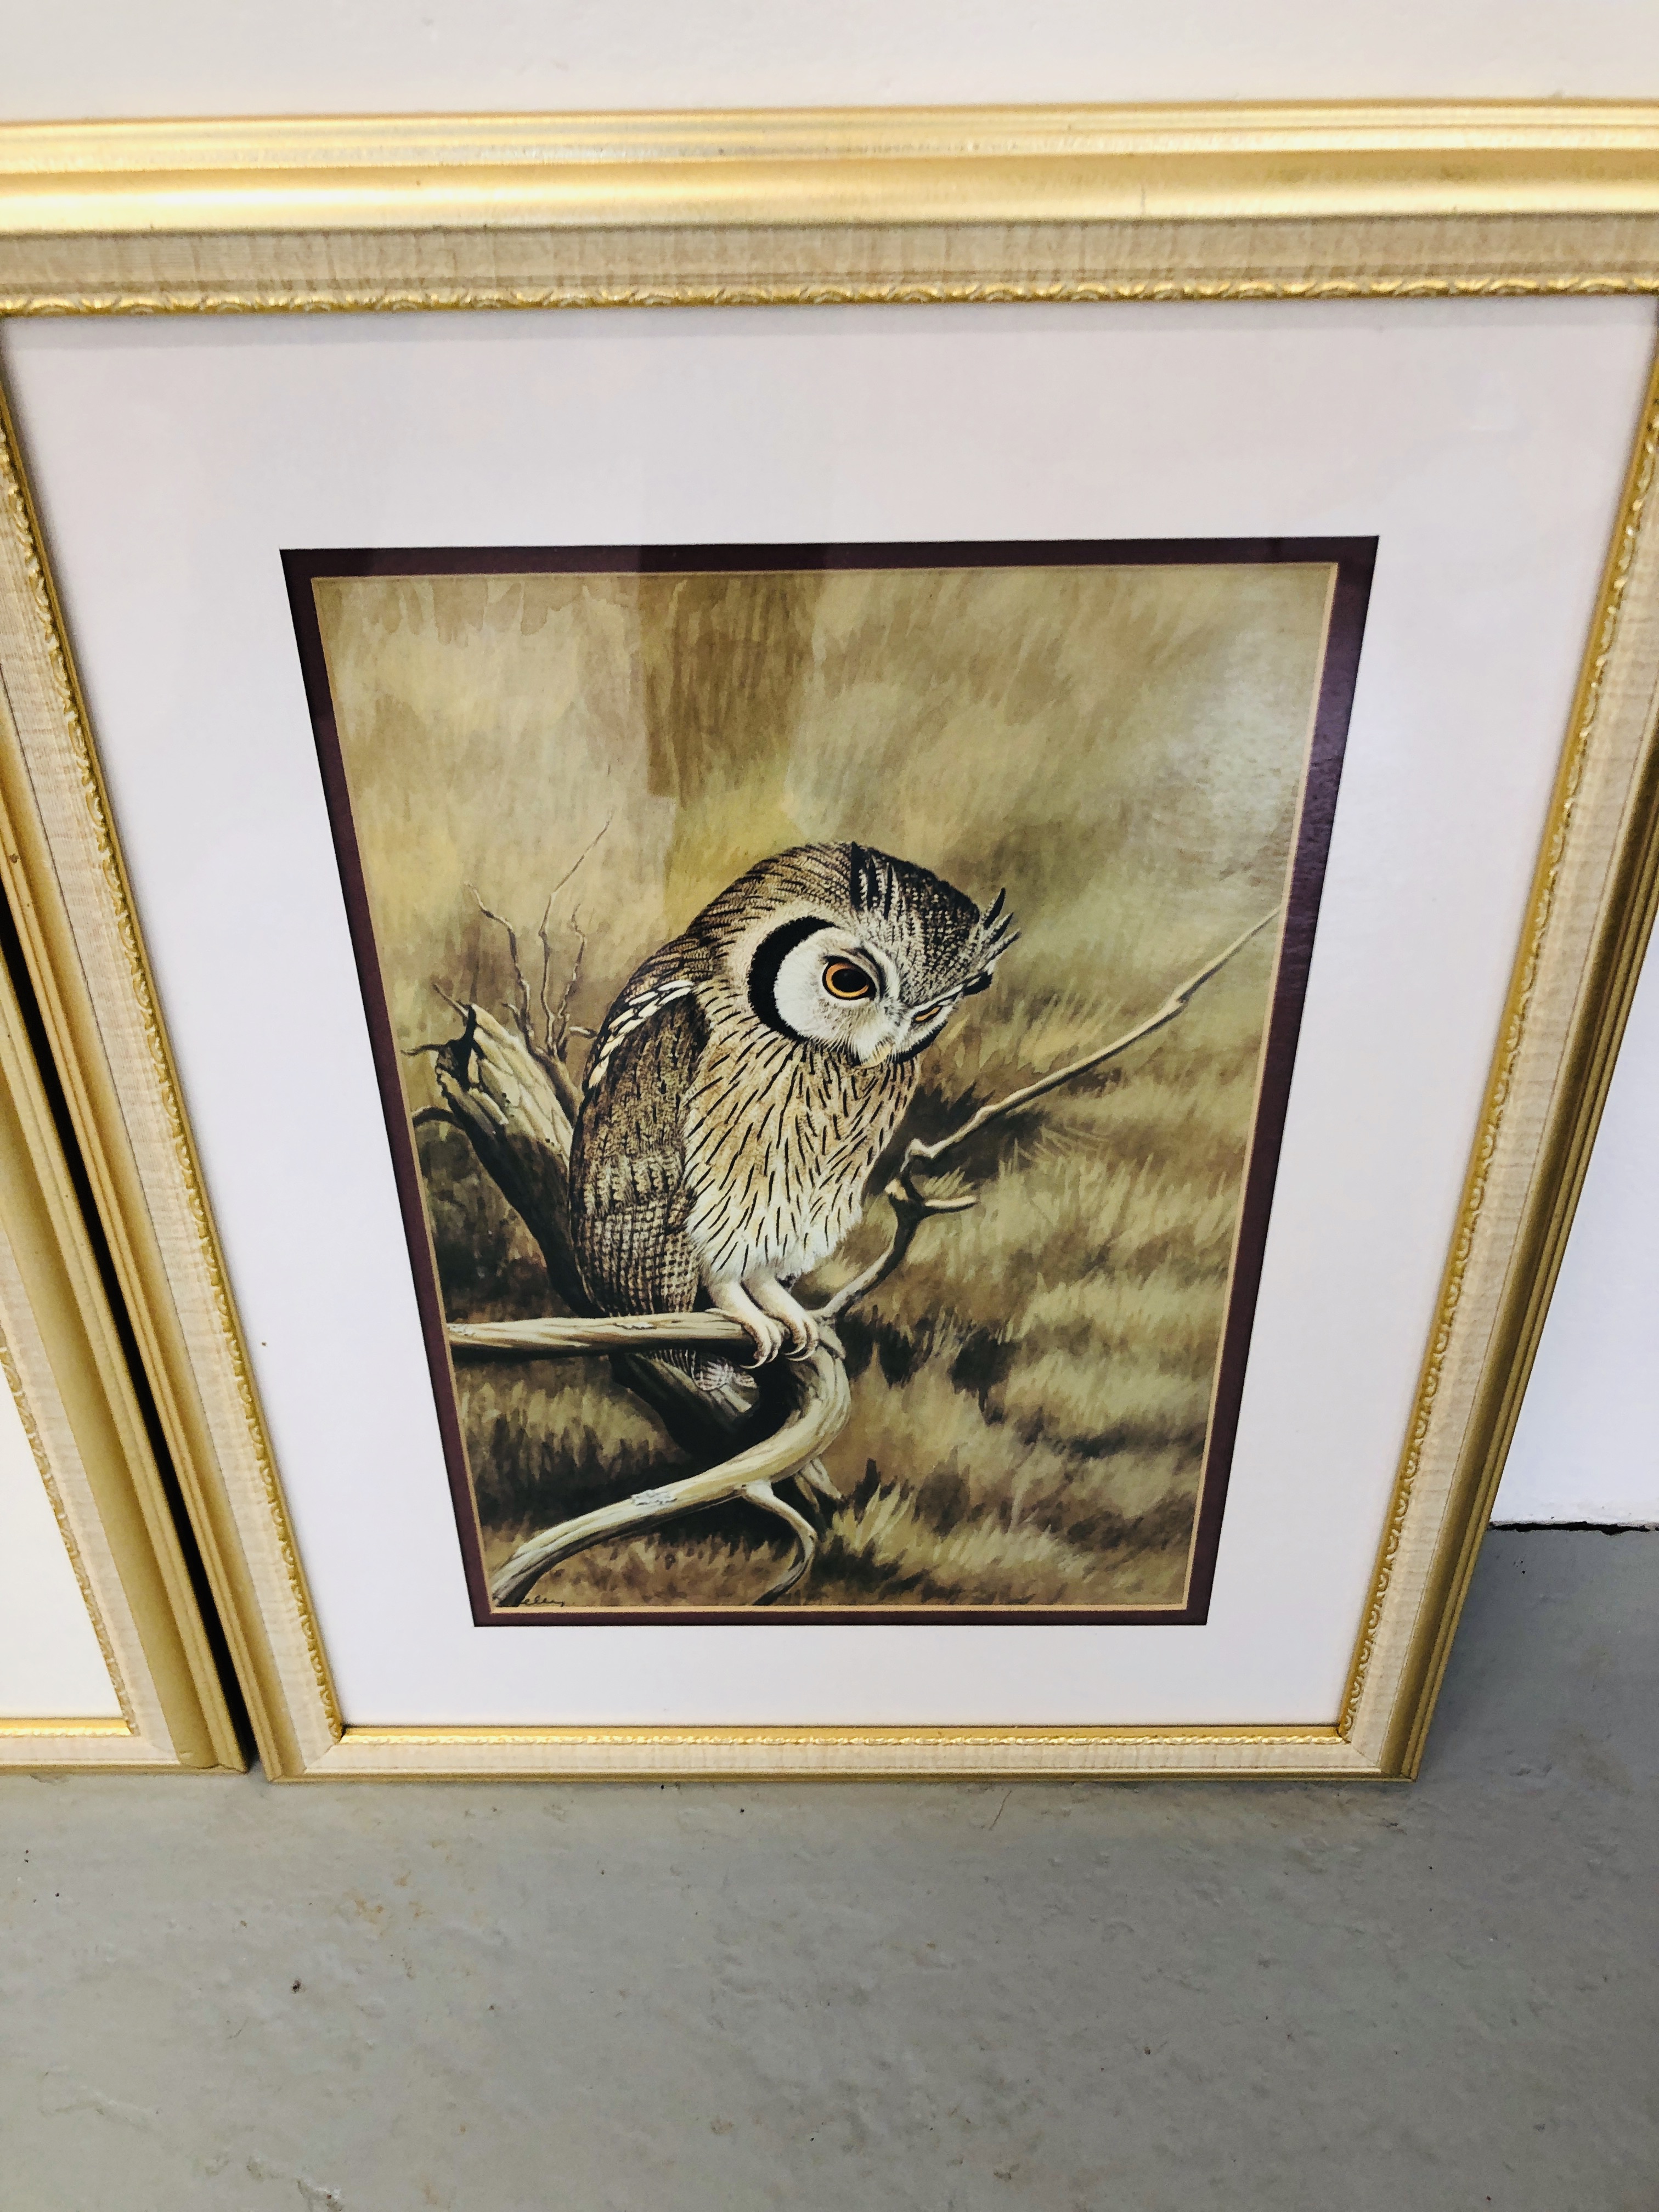 SET OF FRAMED BIRD PRINTS BY "KELLY" - Image 5 of 5